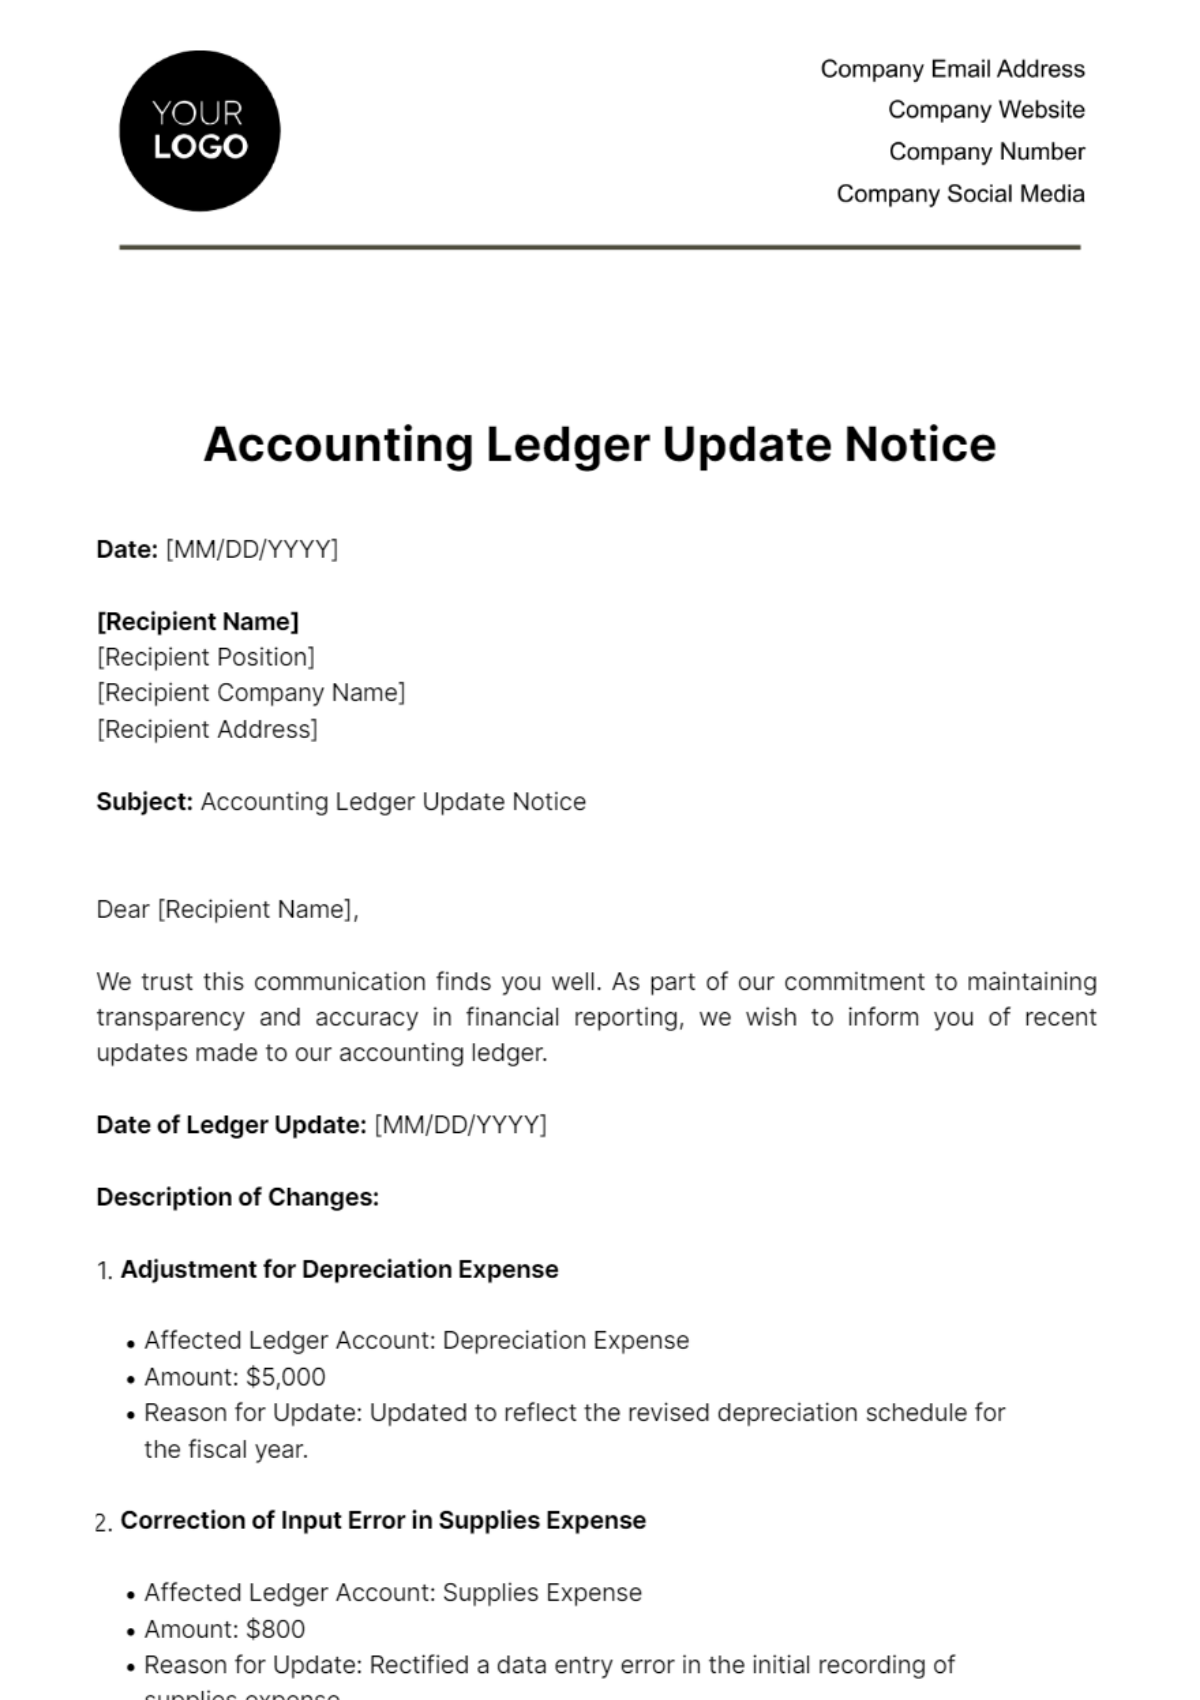 Accounting Ledger Update Notice Template